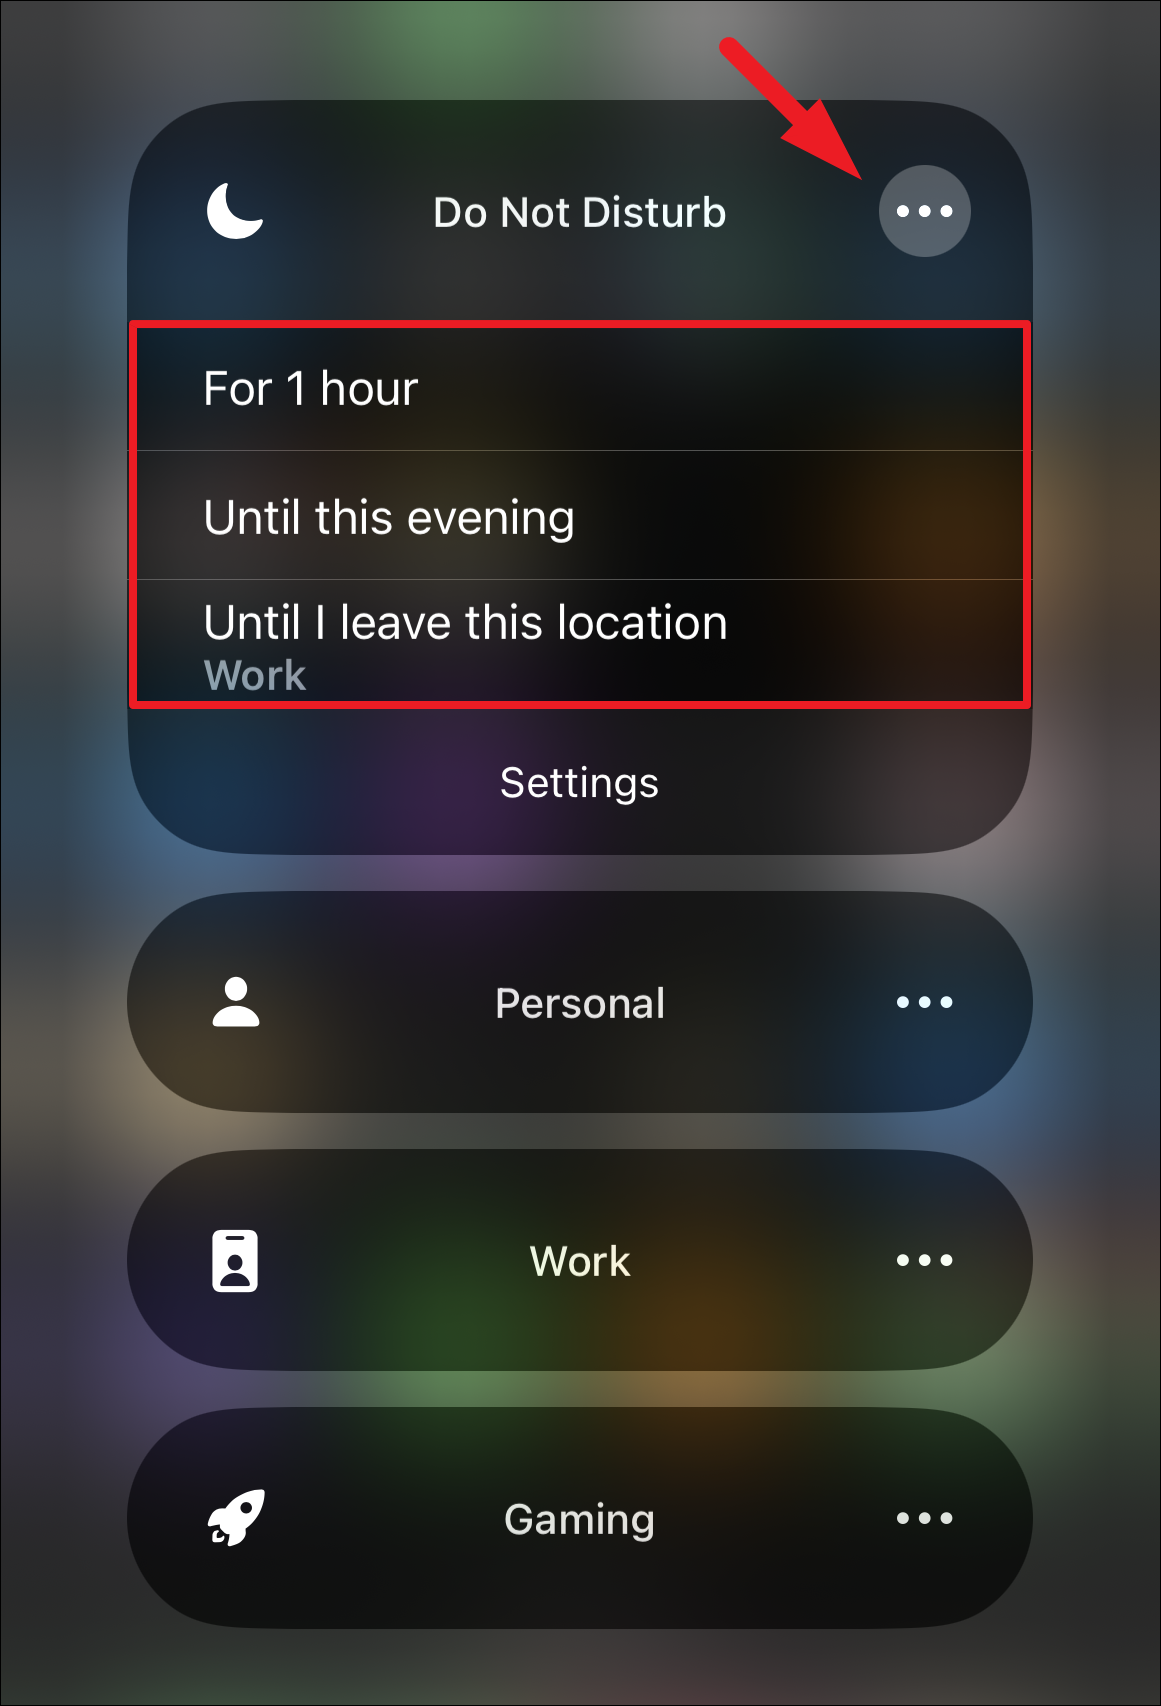 How to Show Do Not Disturb in iMessage on iPhone